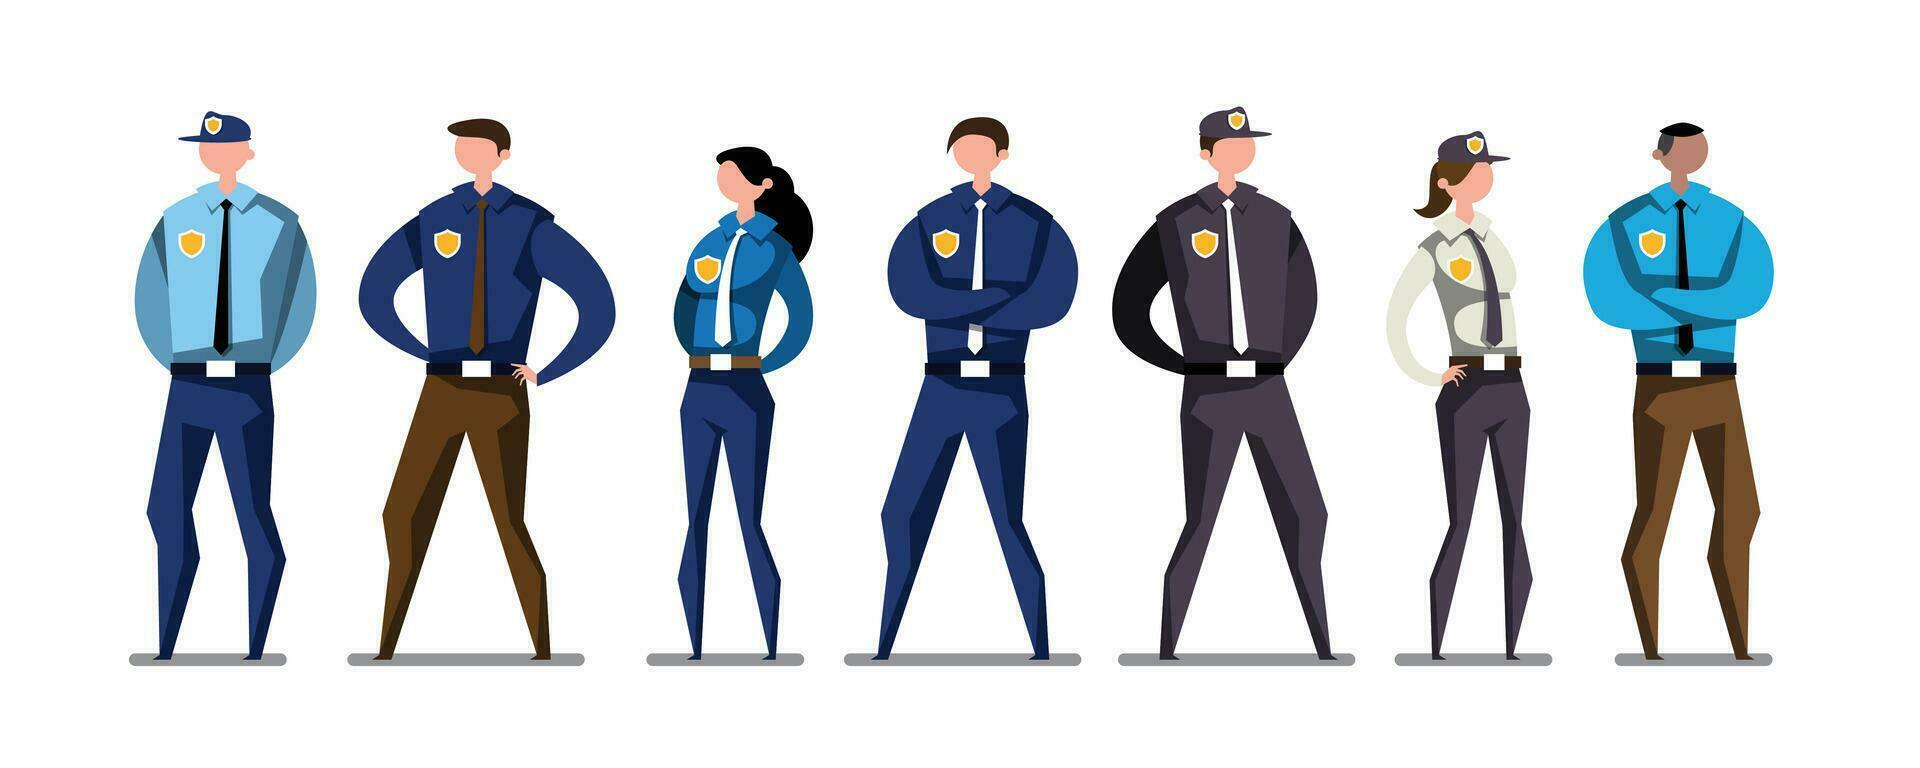 Security Team in Same Uniform, Character Cartoon Style. vector